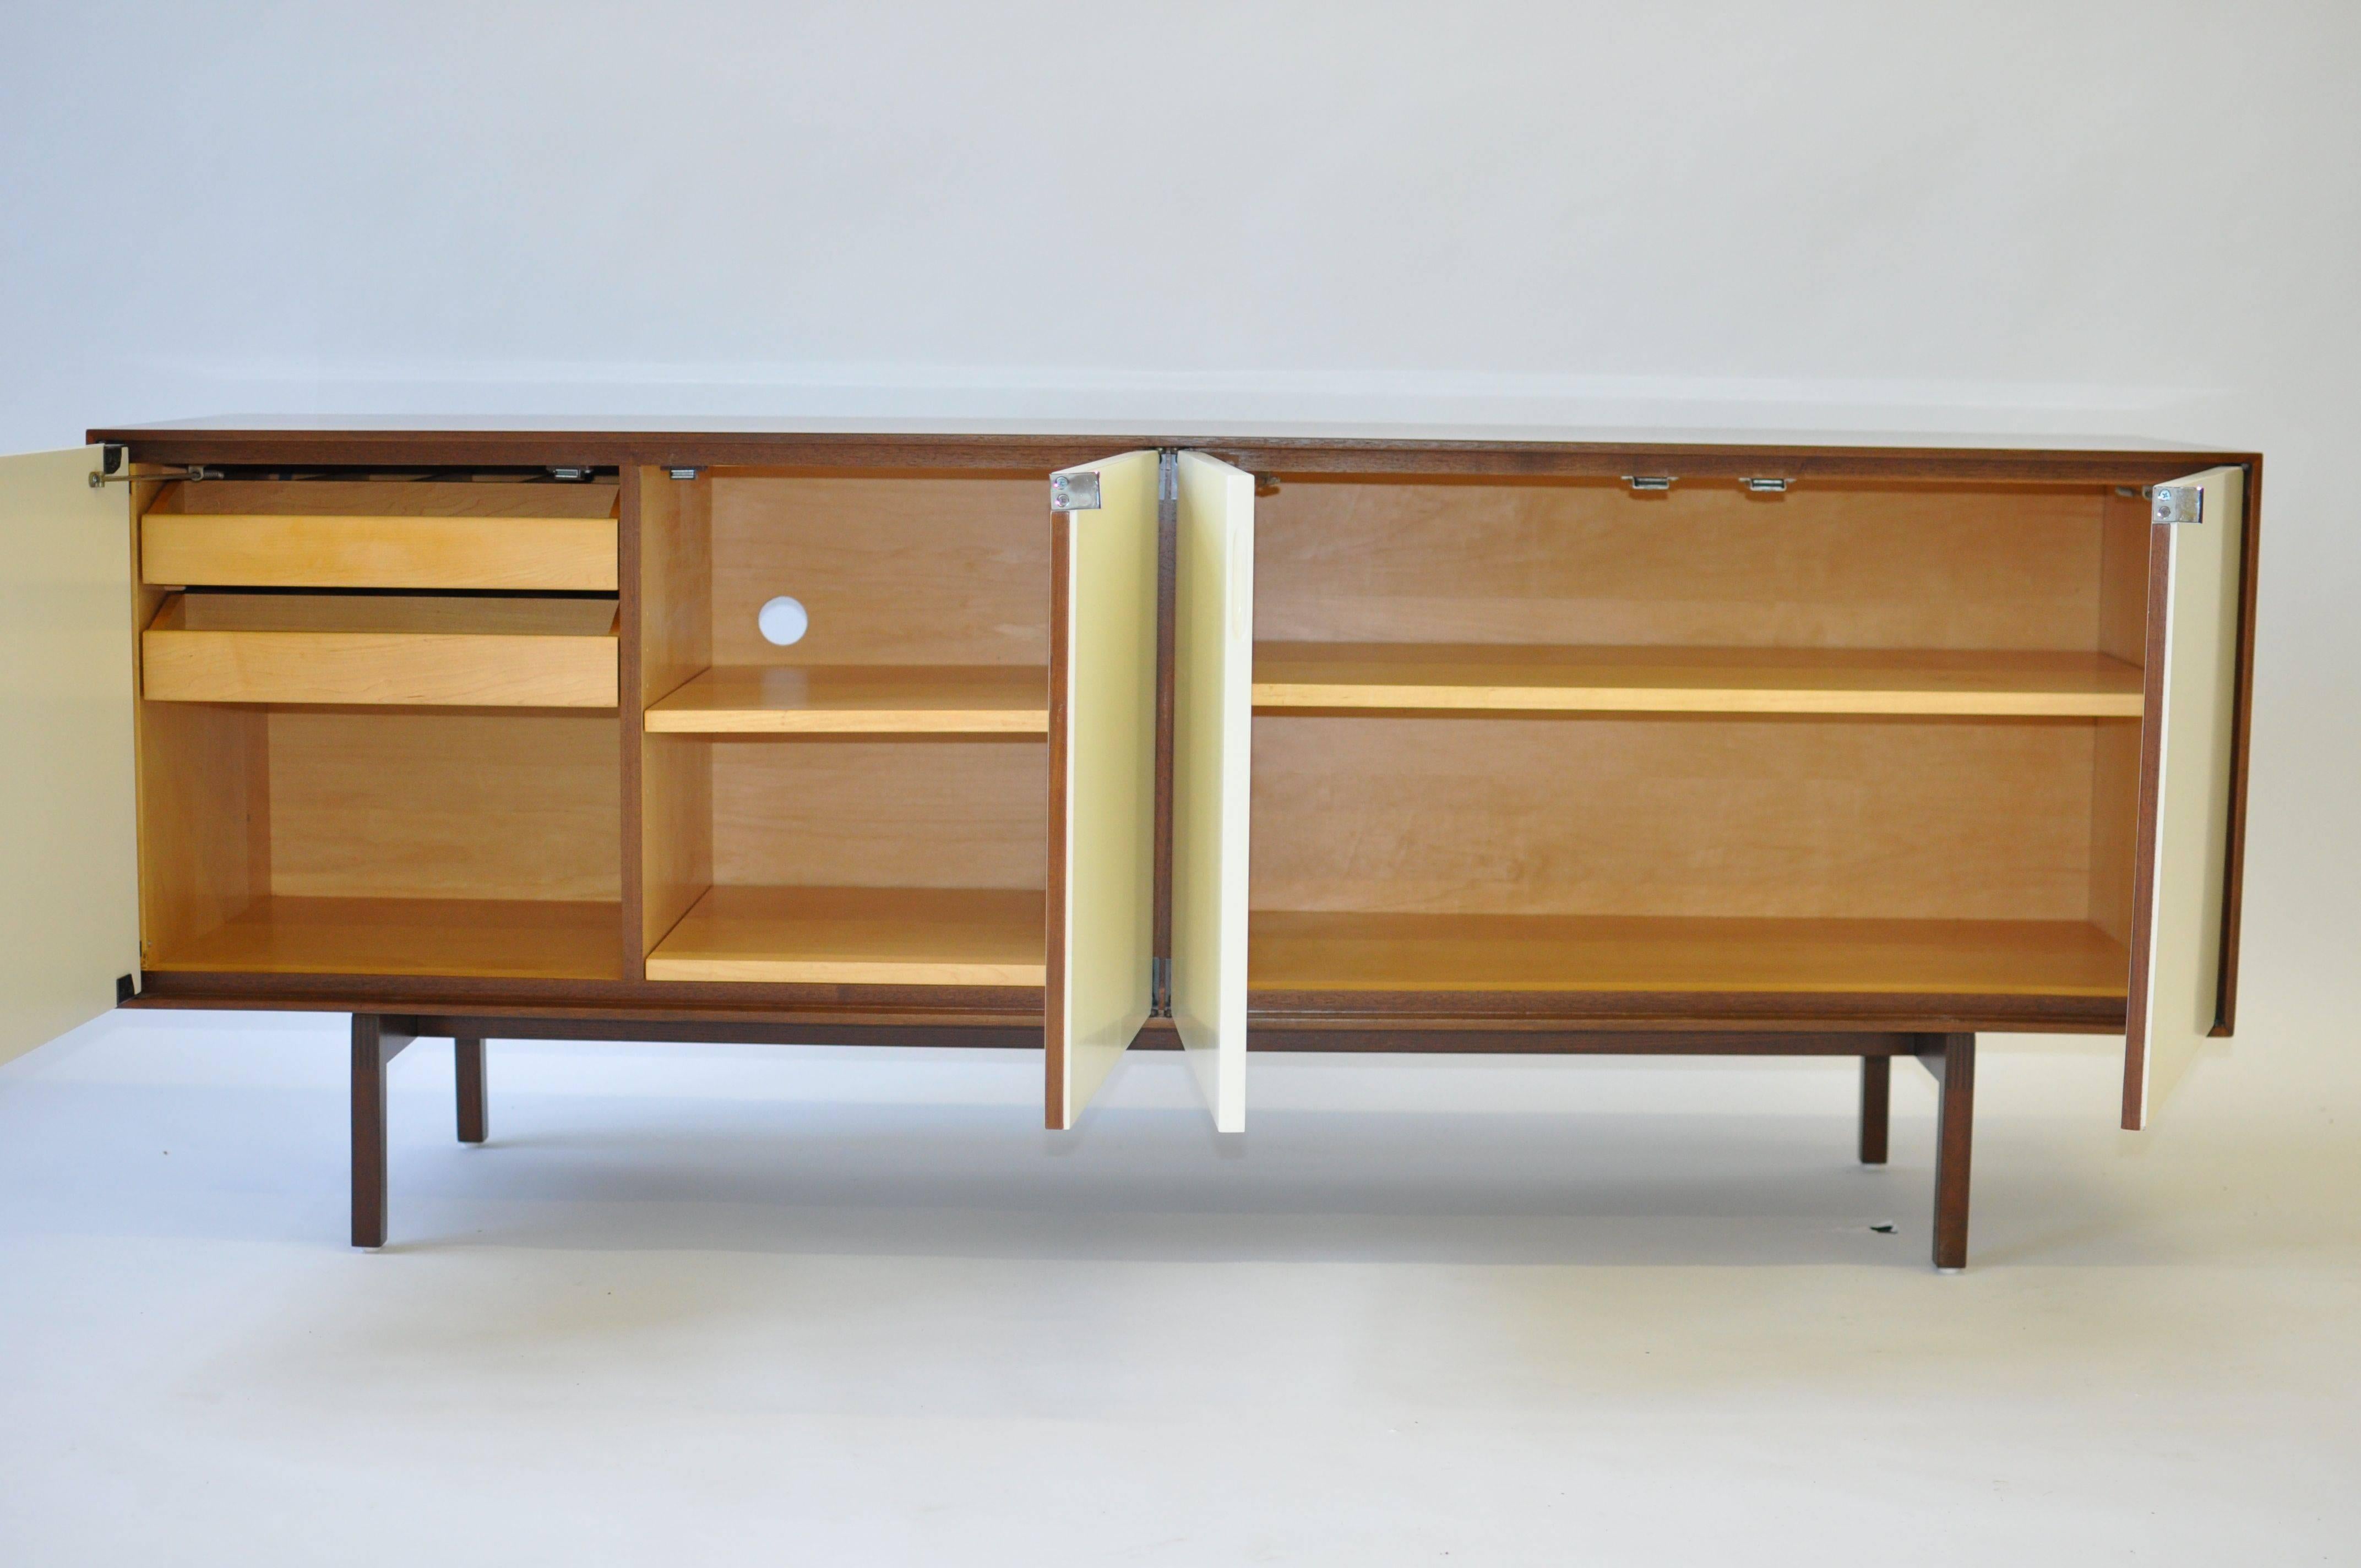 Walnut Florence Knoll Credenza